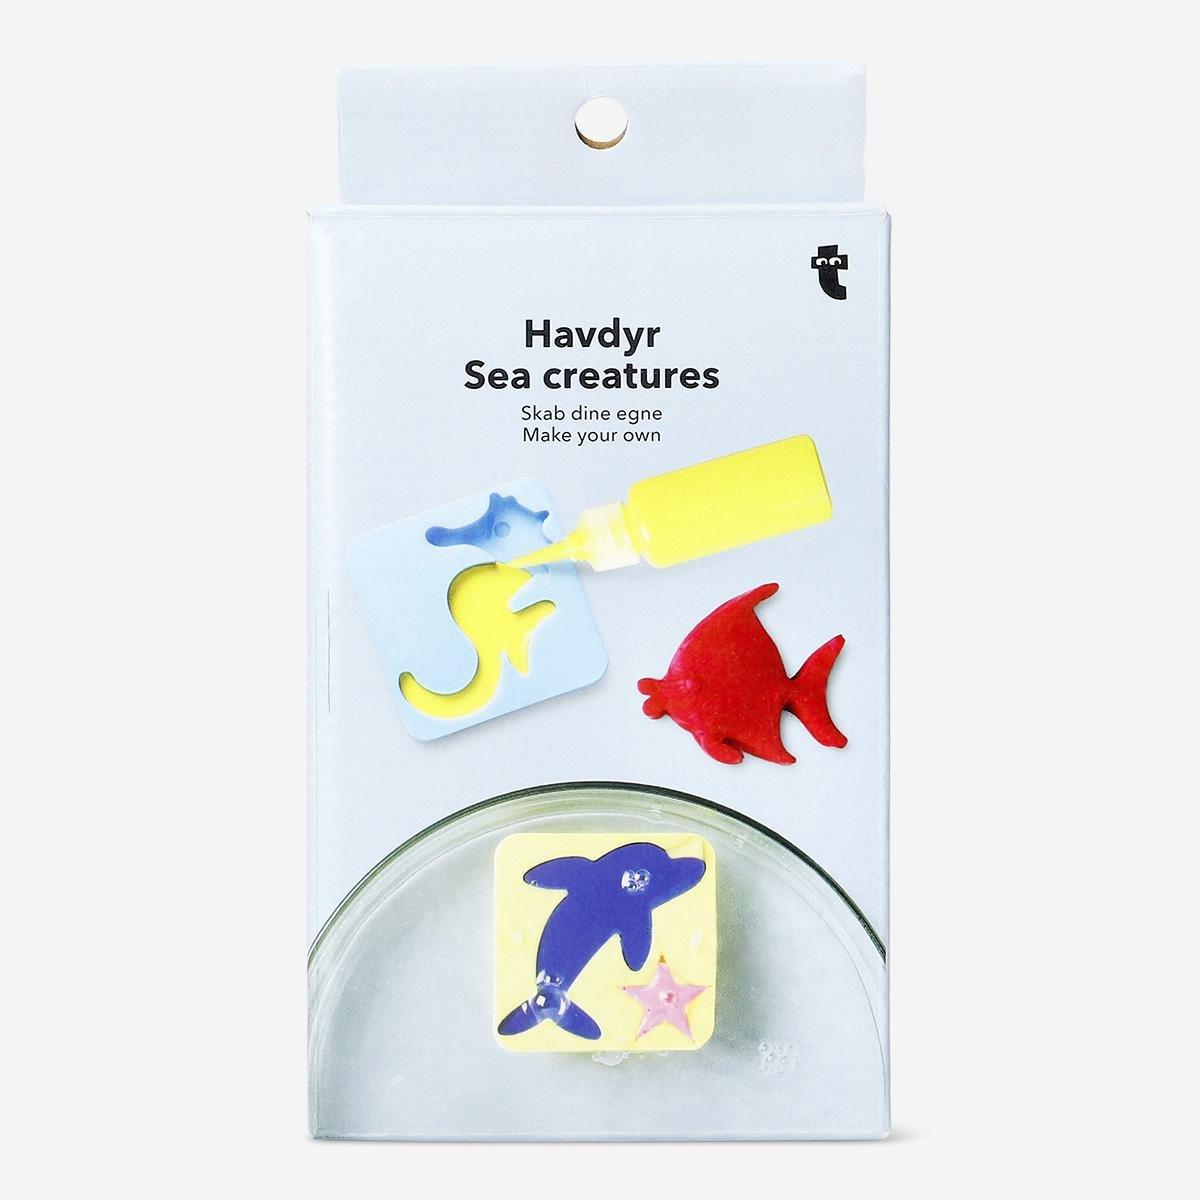 Make-your-own sea creatures set